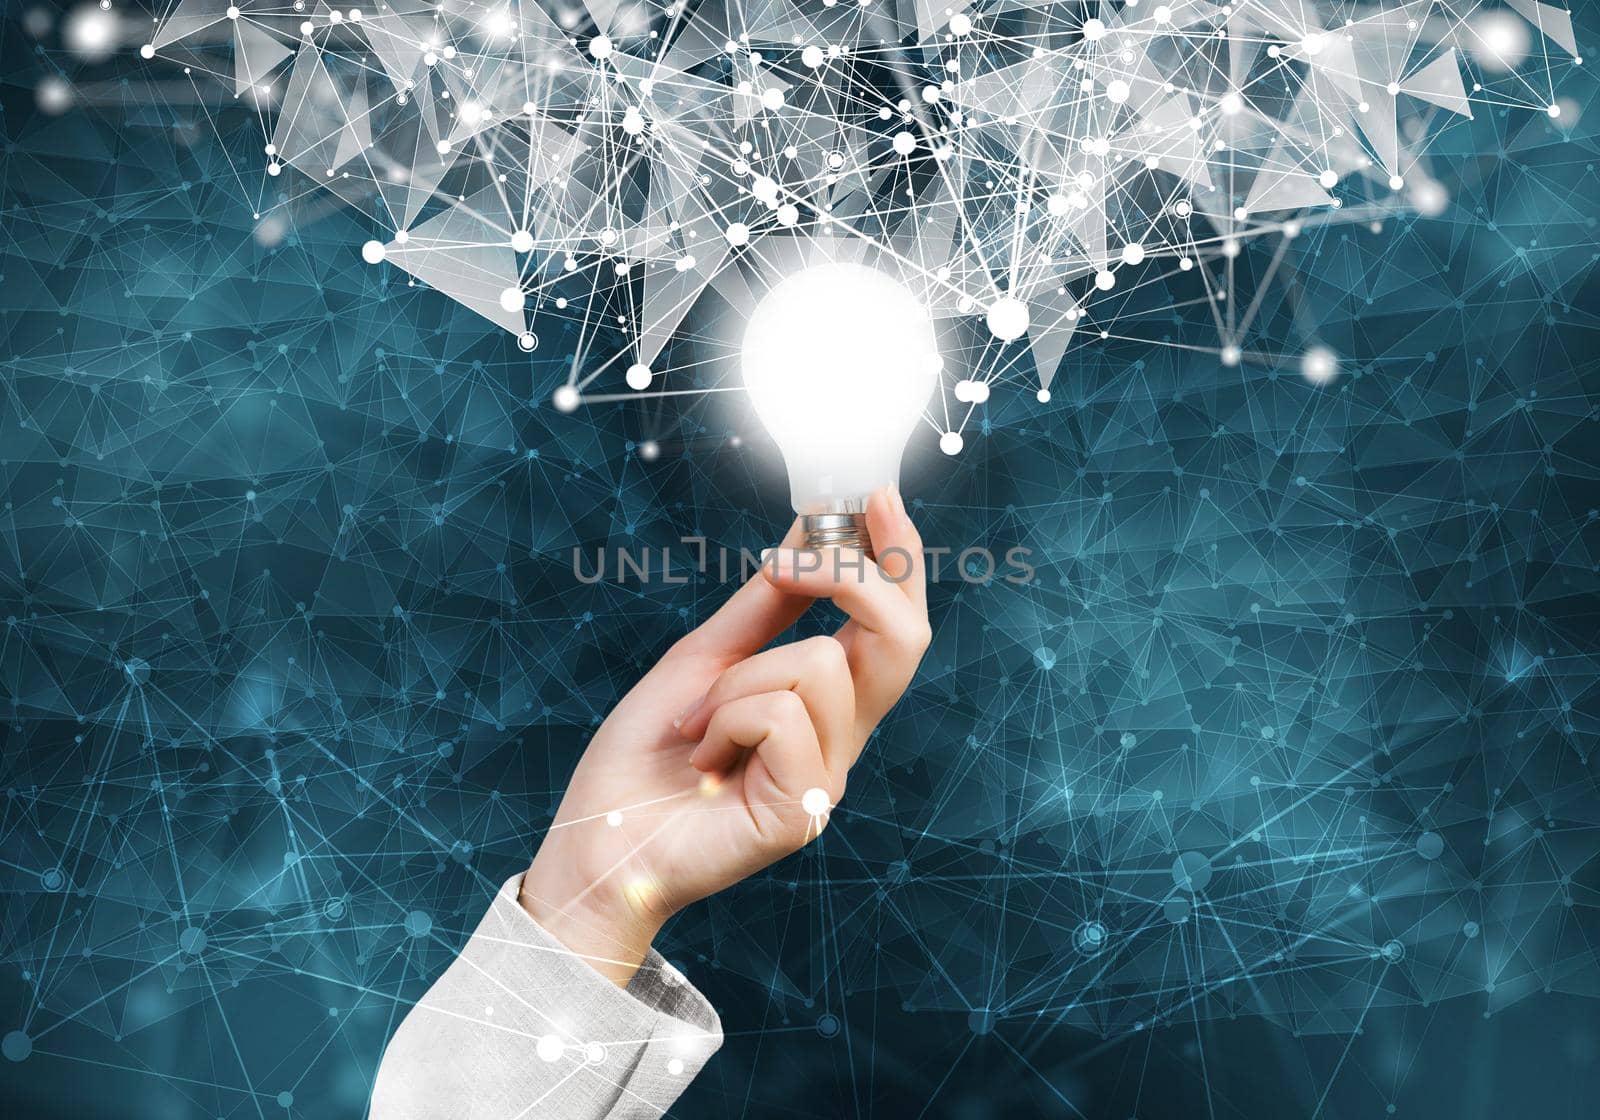 Human hand with glowing lamp and abstract network composition on dark wall background. Science research and innovation. Internet marketing and business development. Mixed media with 3d virtual network